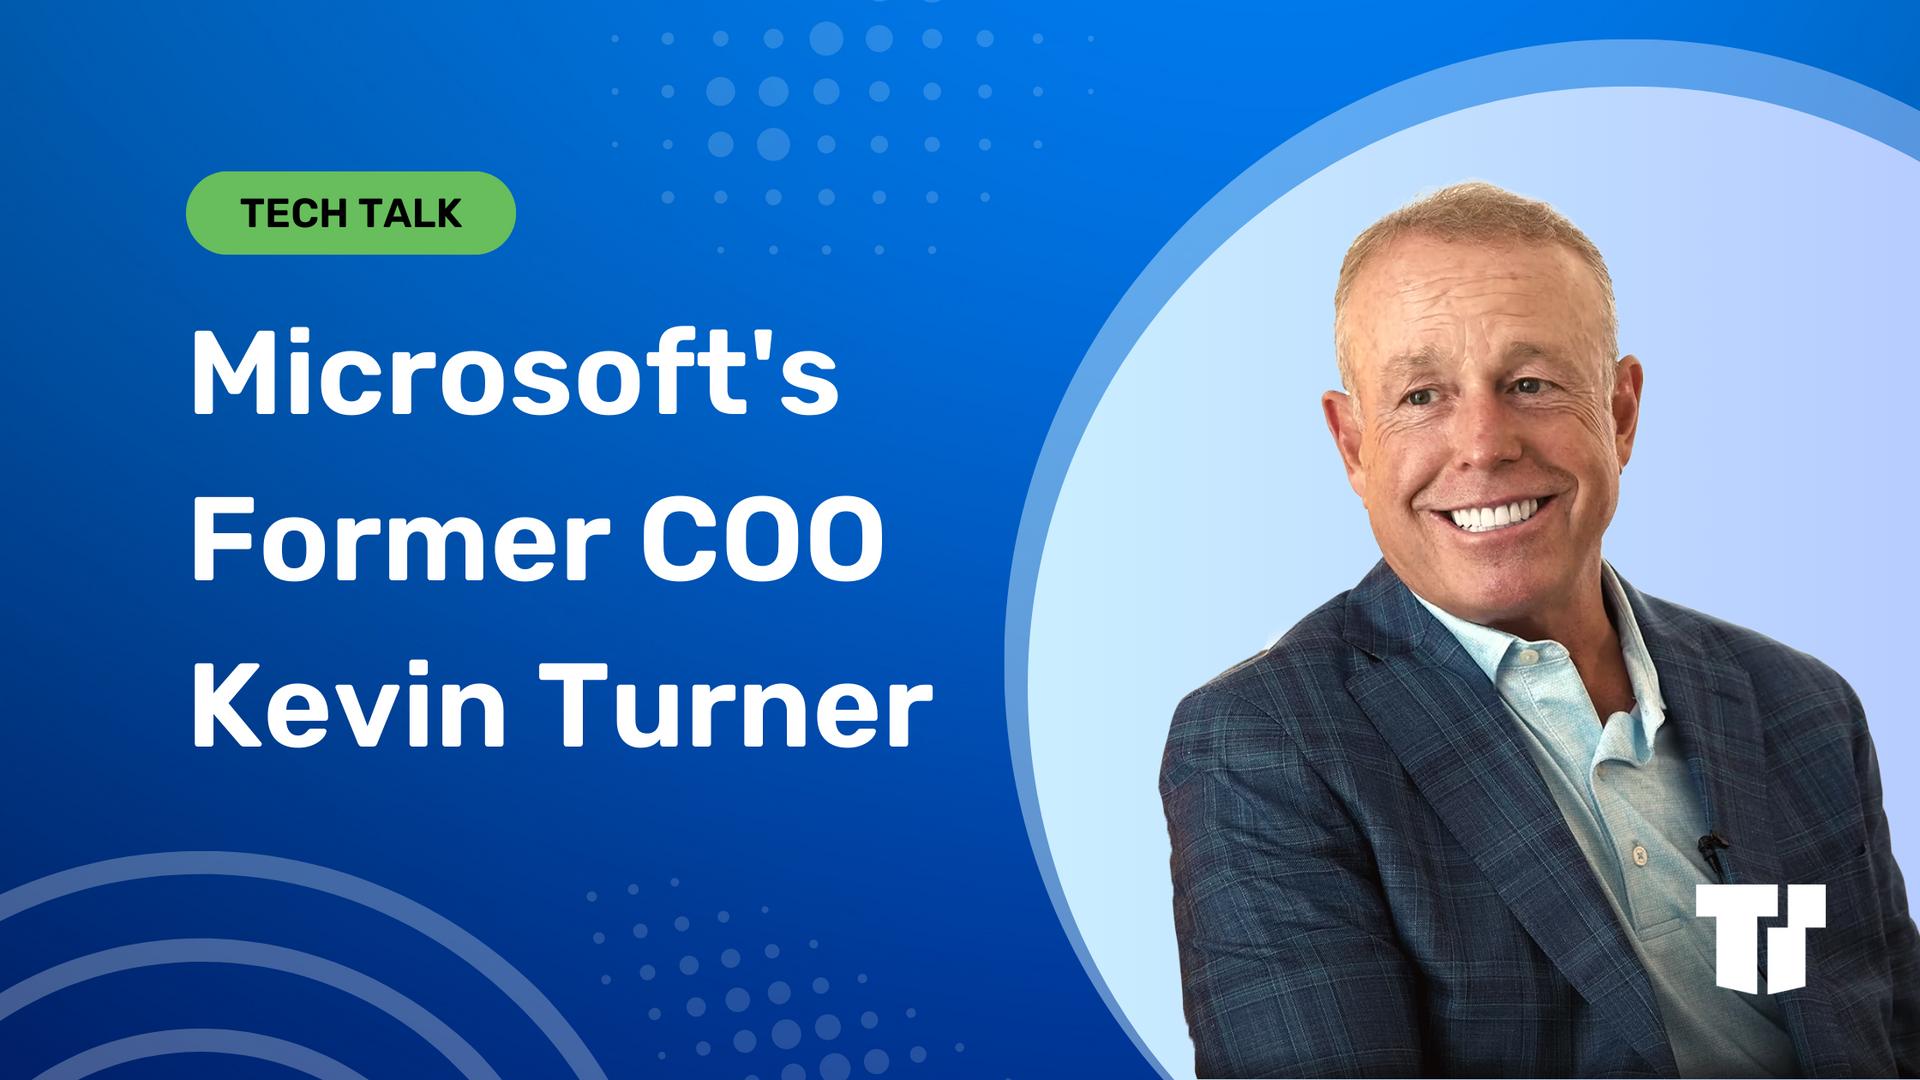 Microsoft’s Former COO, Kevin Turner, Shares Exclusive Insights from His Microsoft Days with Trusted Tech Team cover image